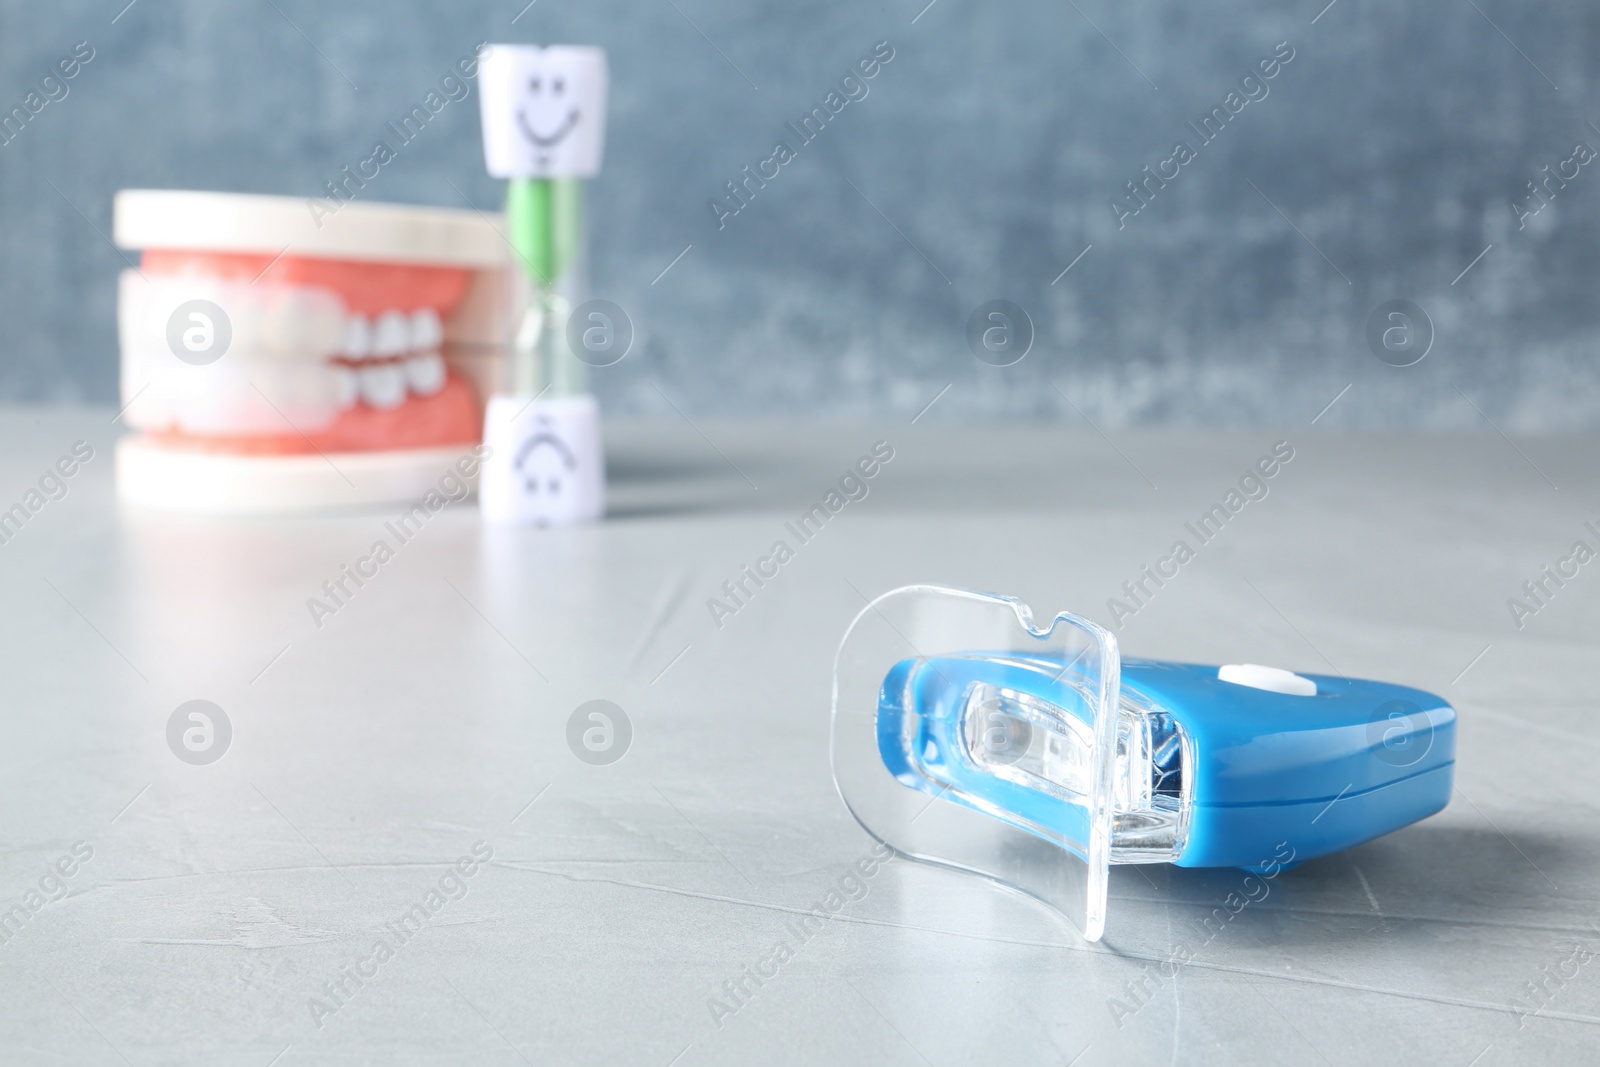 Photo of Teeth whitener on table against blurred background. Space for text